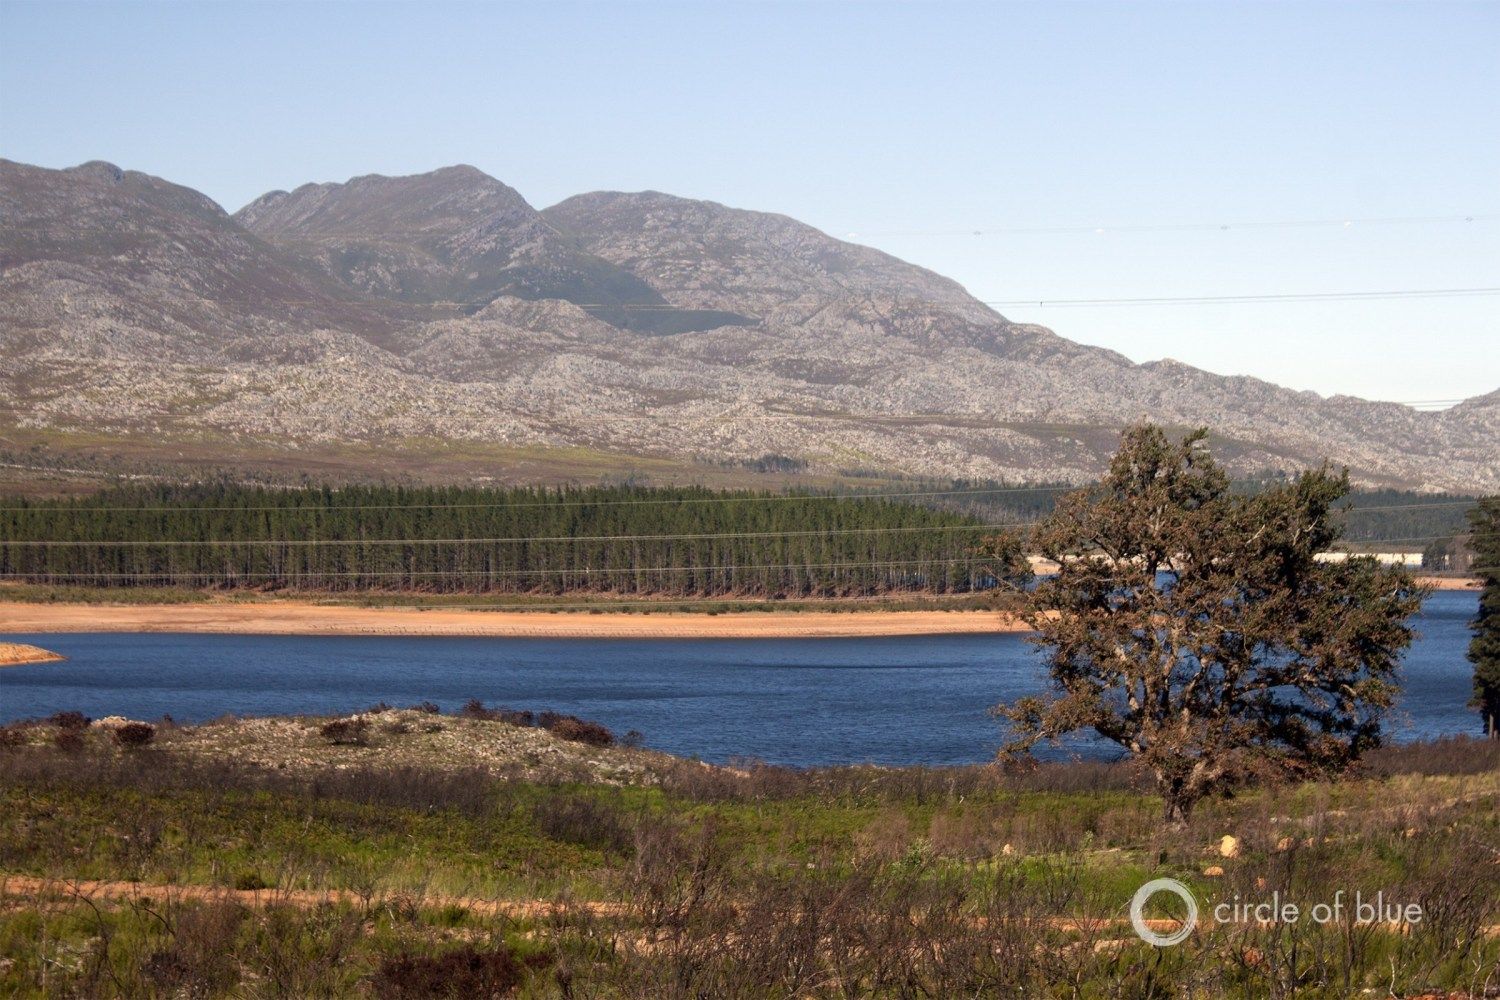 Steenbras Dam, east of Cape Town, is the site of exploratory groundwater drilling. Image by Brett Walton/Circle of Blue. South Africa, 2018.